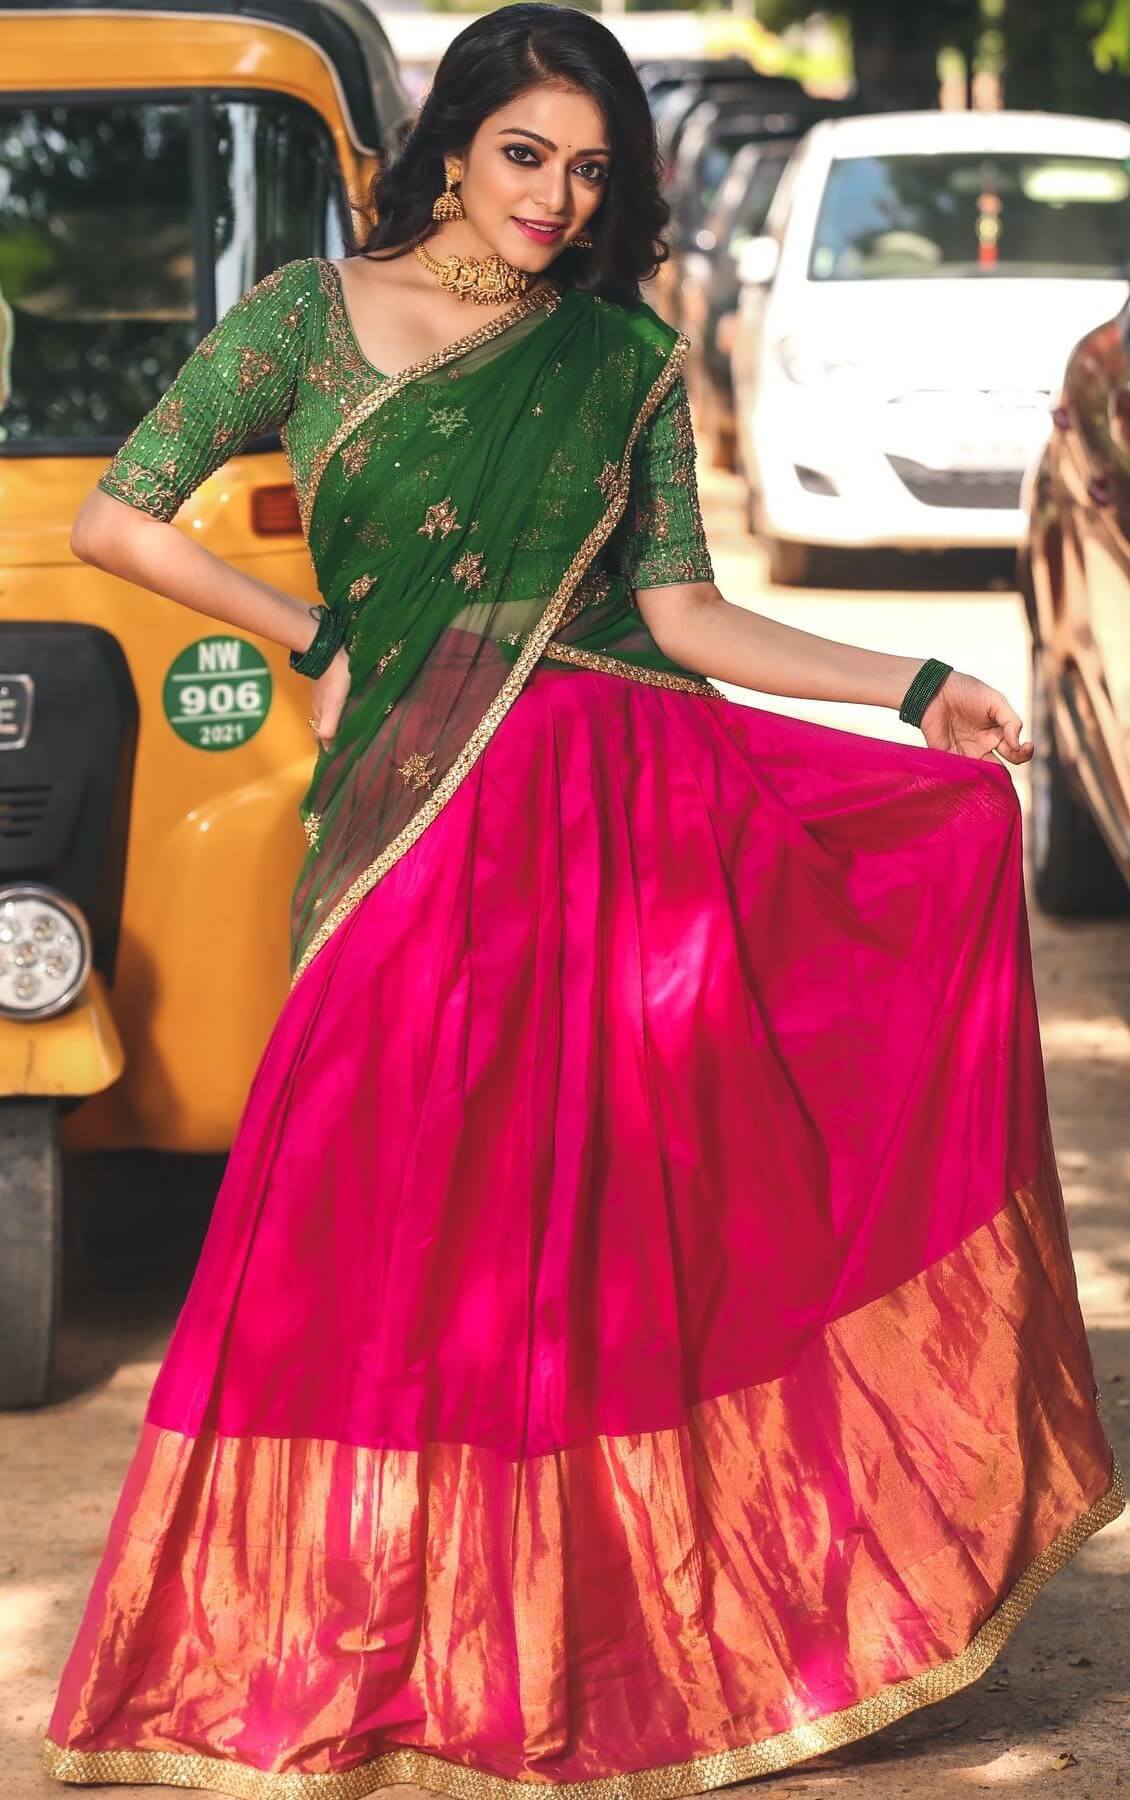 South  Actress Janani Iyer In Pink & Green Lehenga Outfit